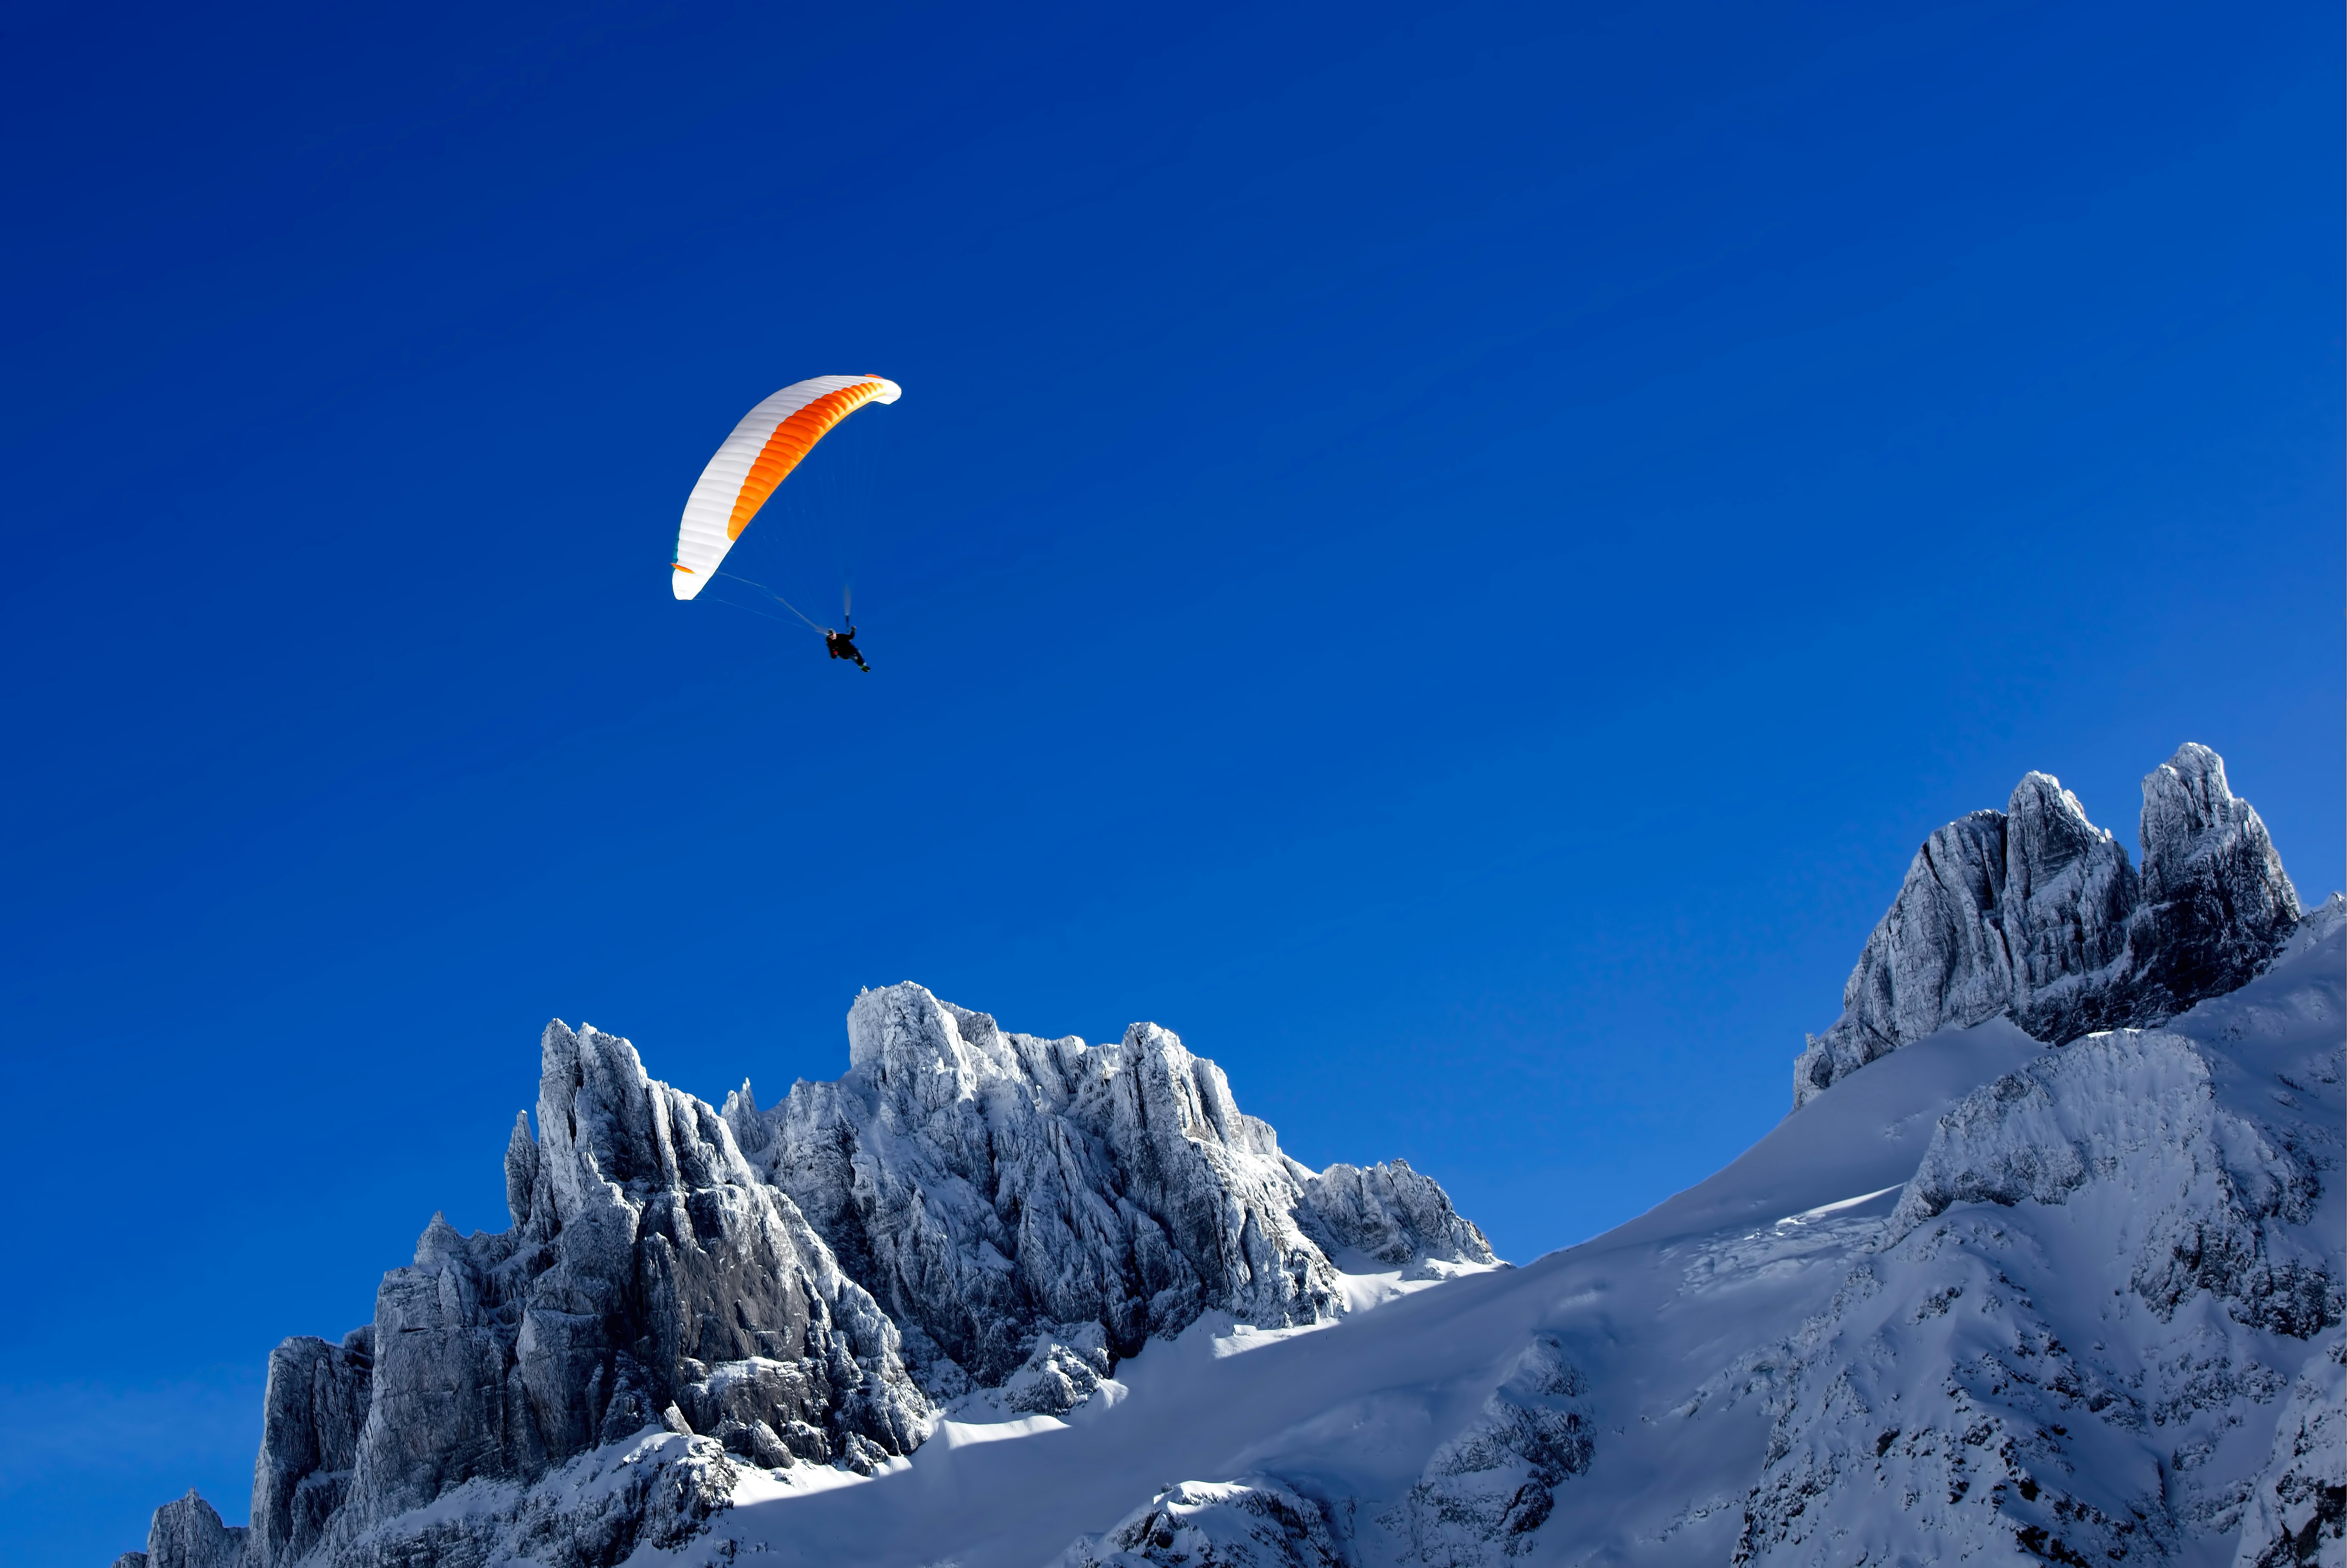 person paragliding above snow covered mountain during daytime